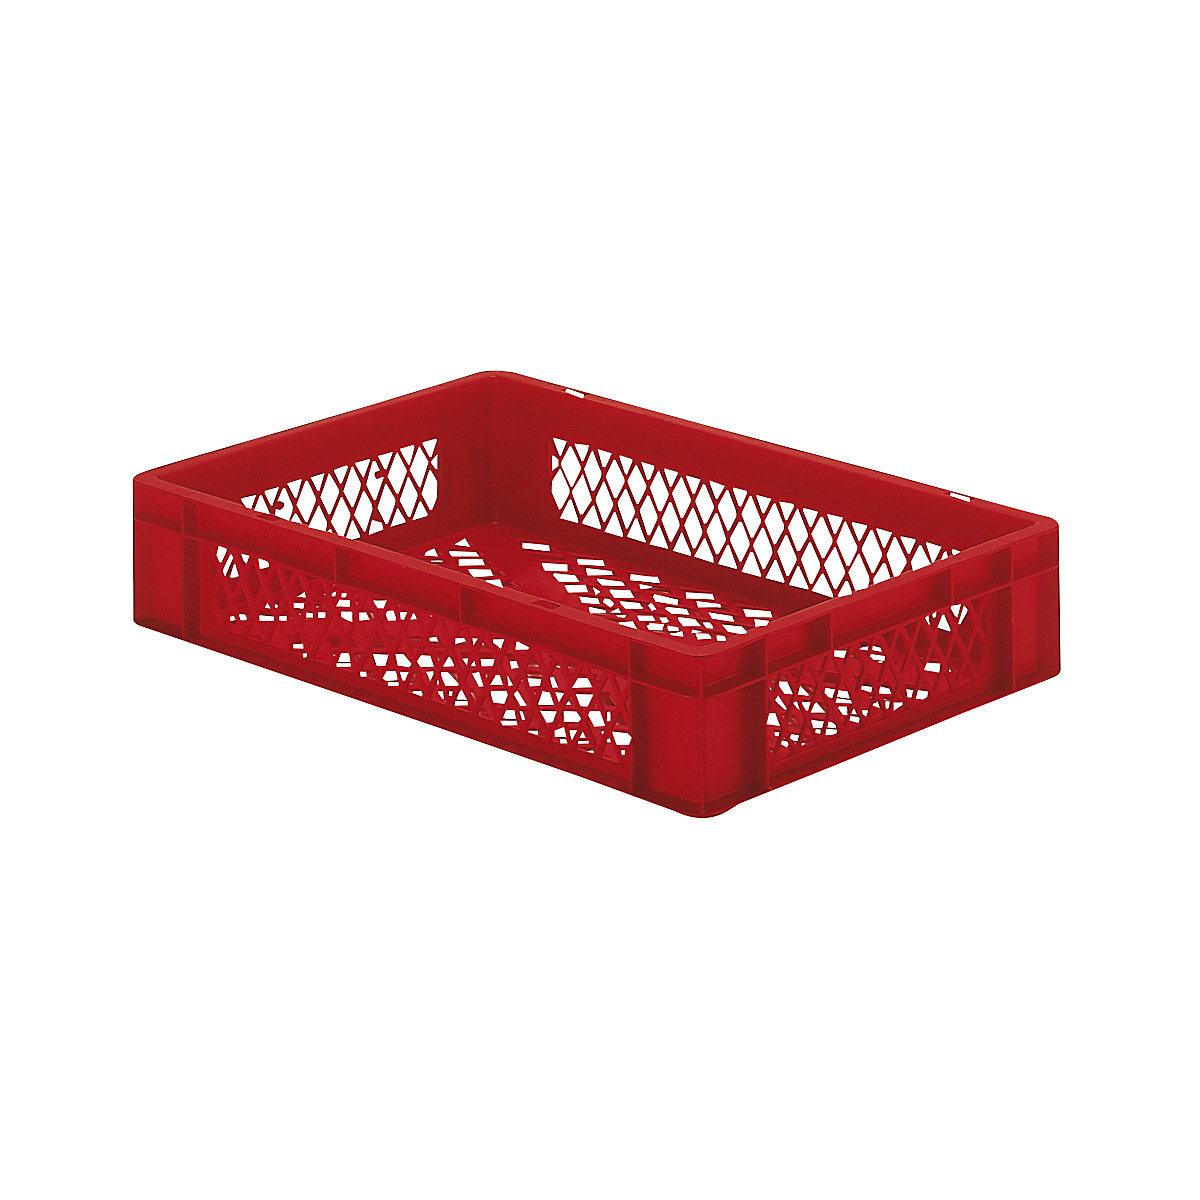 Euro stacking container, perforated walls and base, LxWxH 600 x 400 x 120 mm, red, pack of 5